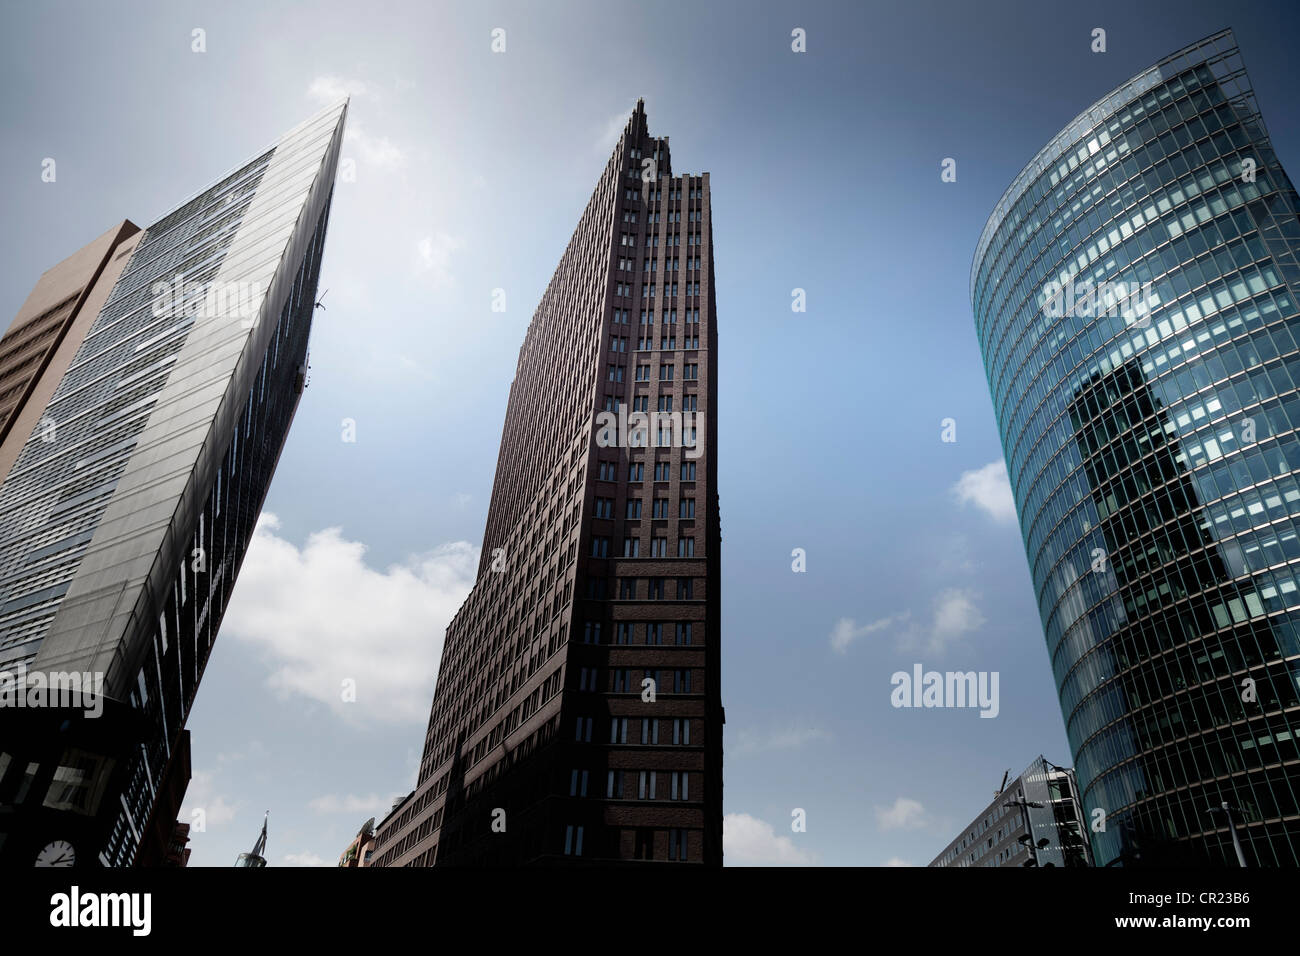 Low angle view of urban skyscrapers Stock Photo